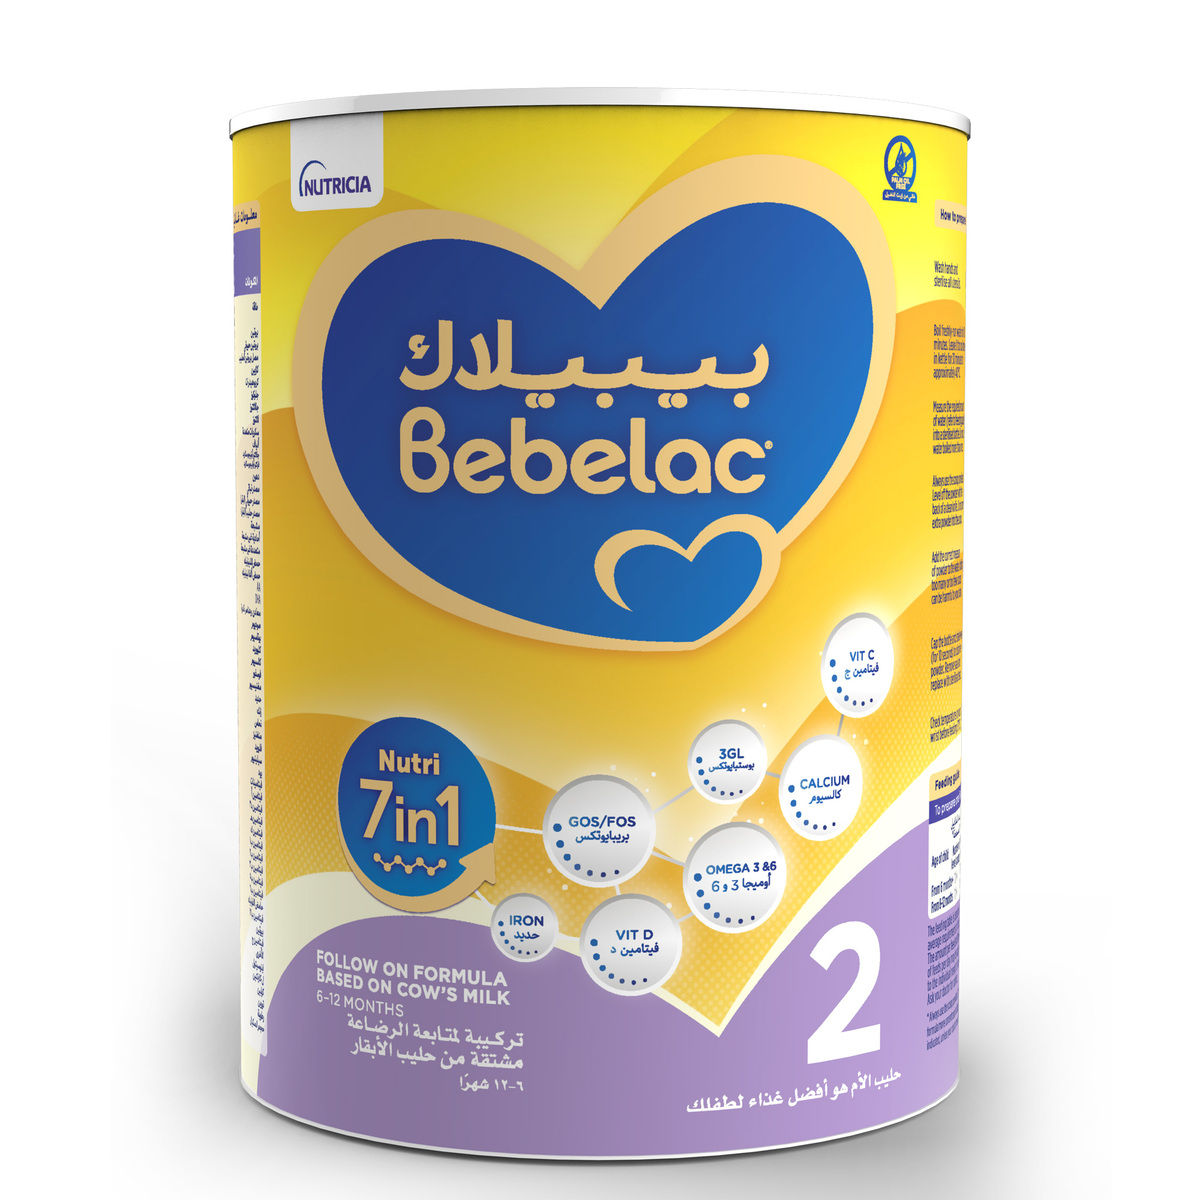 Bebelac Nutri 7in1 Follow On Formula Stage 2 From 6 to 12 Months 800 g